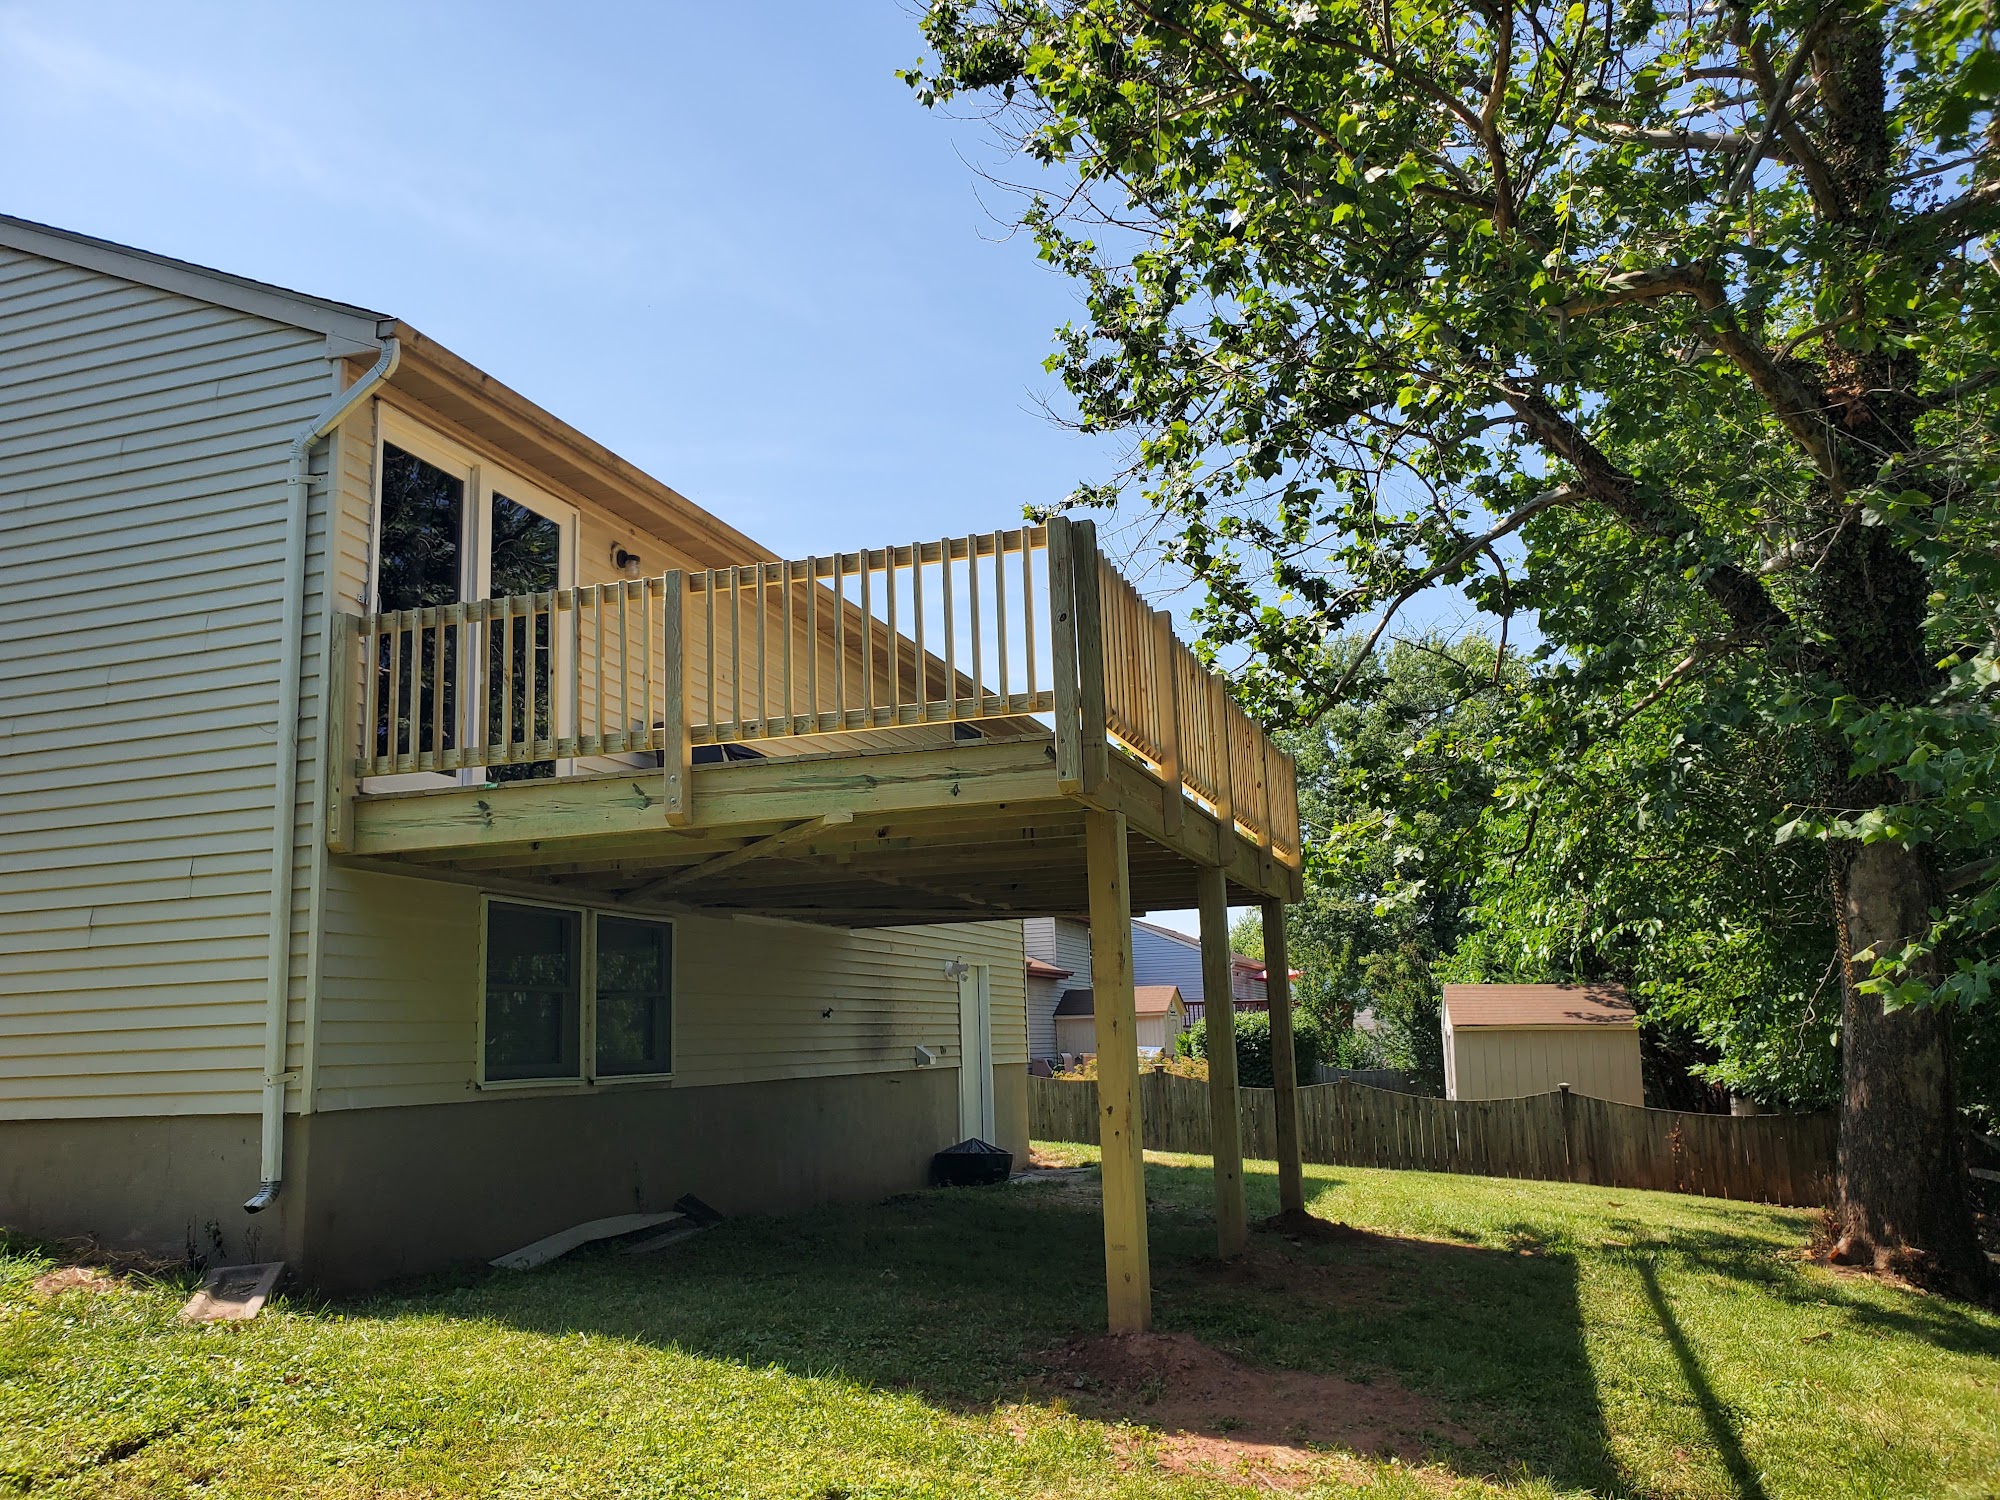 Deck It Out LLC 7731 River Rock Ct, Williamsport Maryland 21795